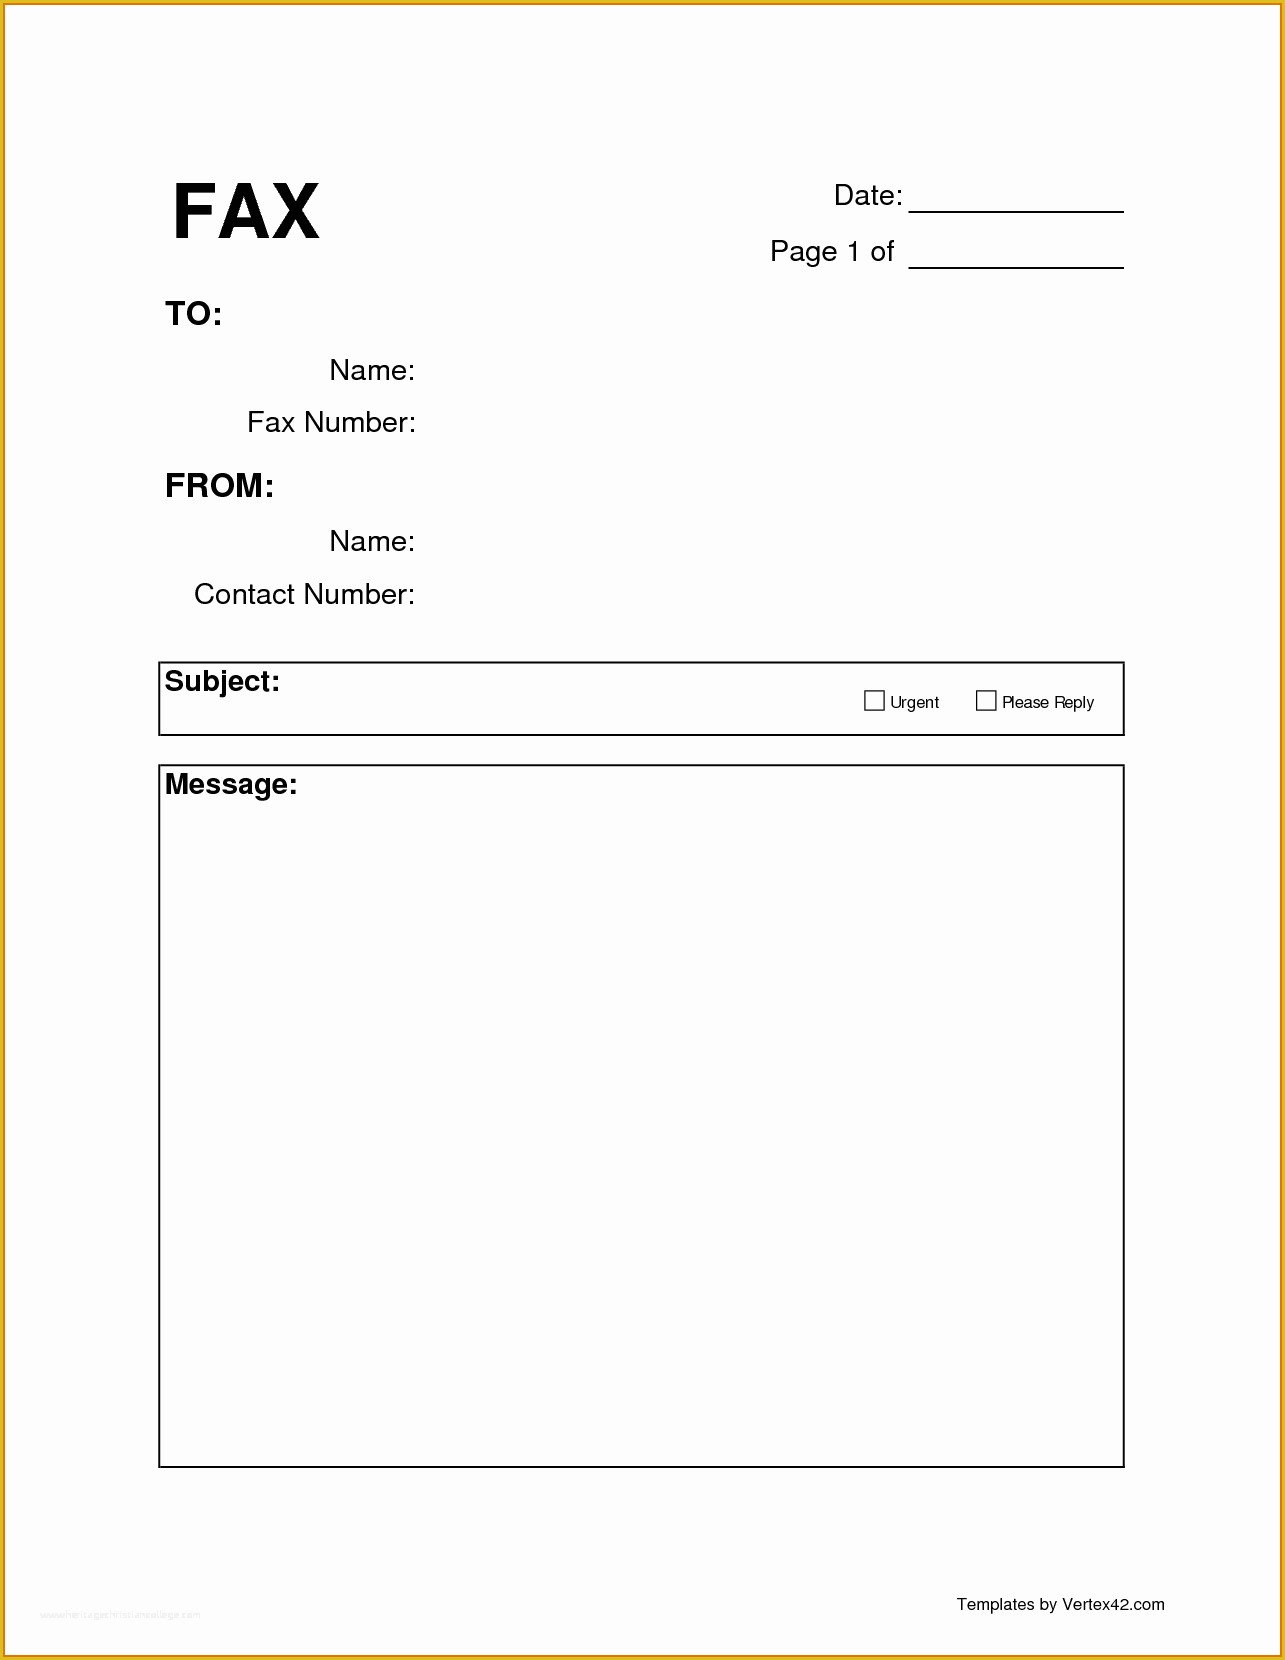 Fax Template Free Of 4 Printable Fax Cover Sheetsreference Letters Words